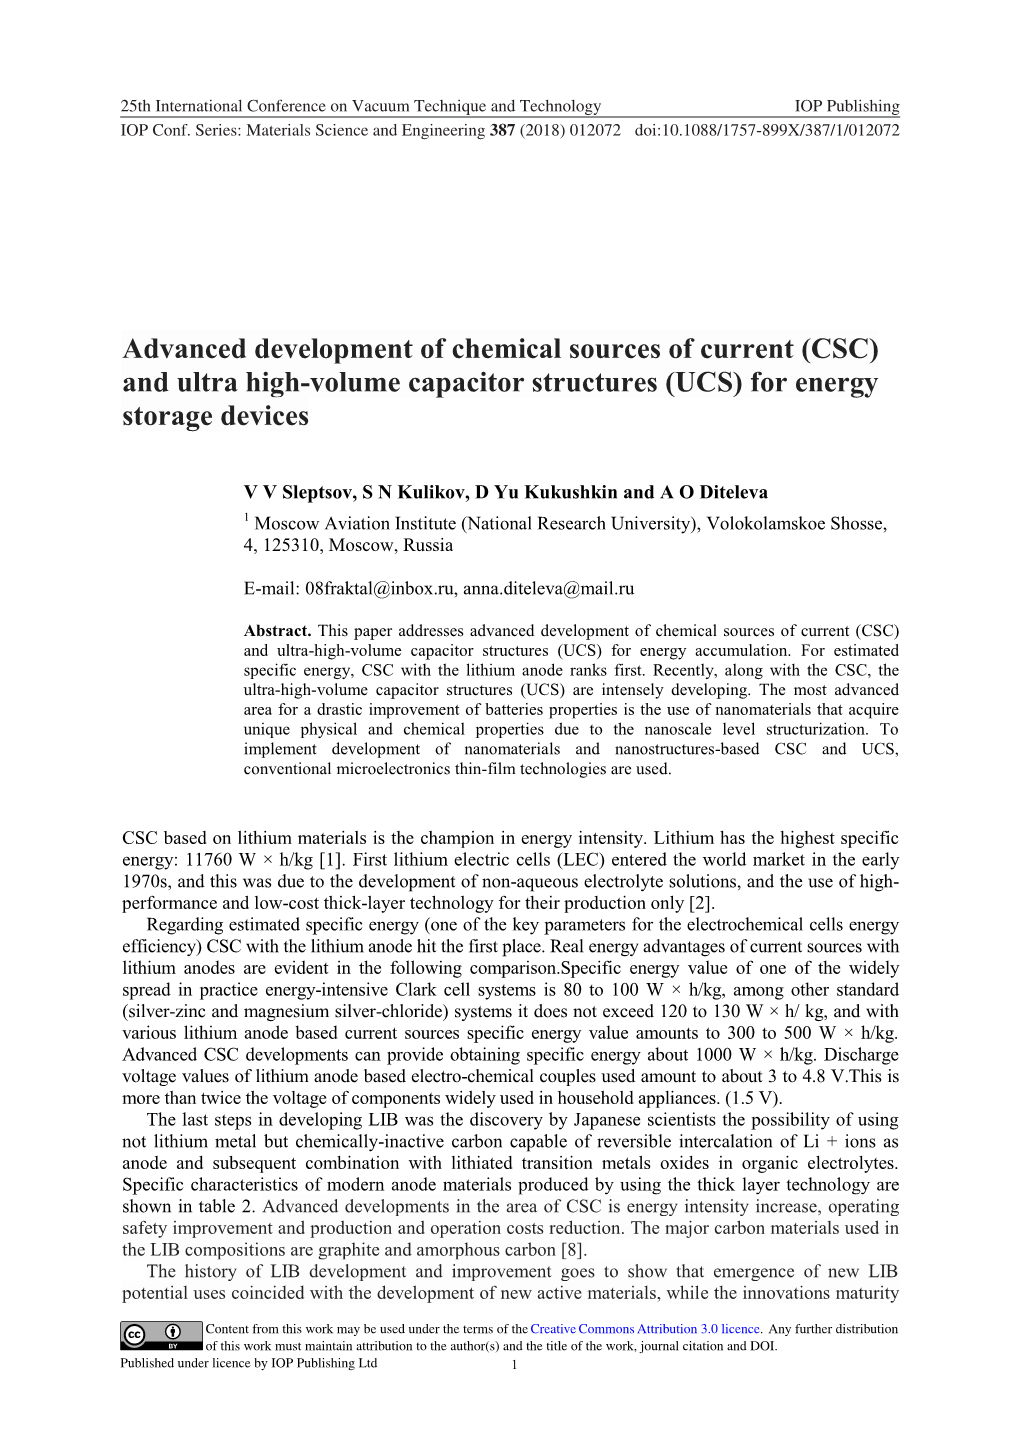 Advanced Development of Chemical Sources of Current (CSC) and Ultra High-Volume Capacitor Structures (UCS) for Energy Storage Devices